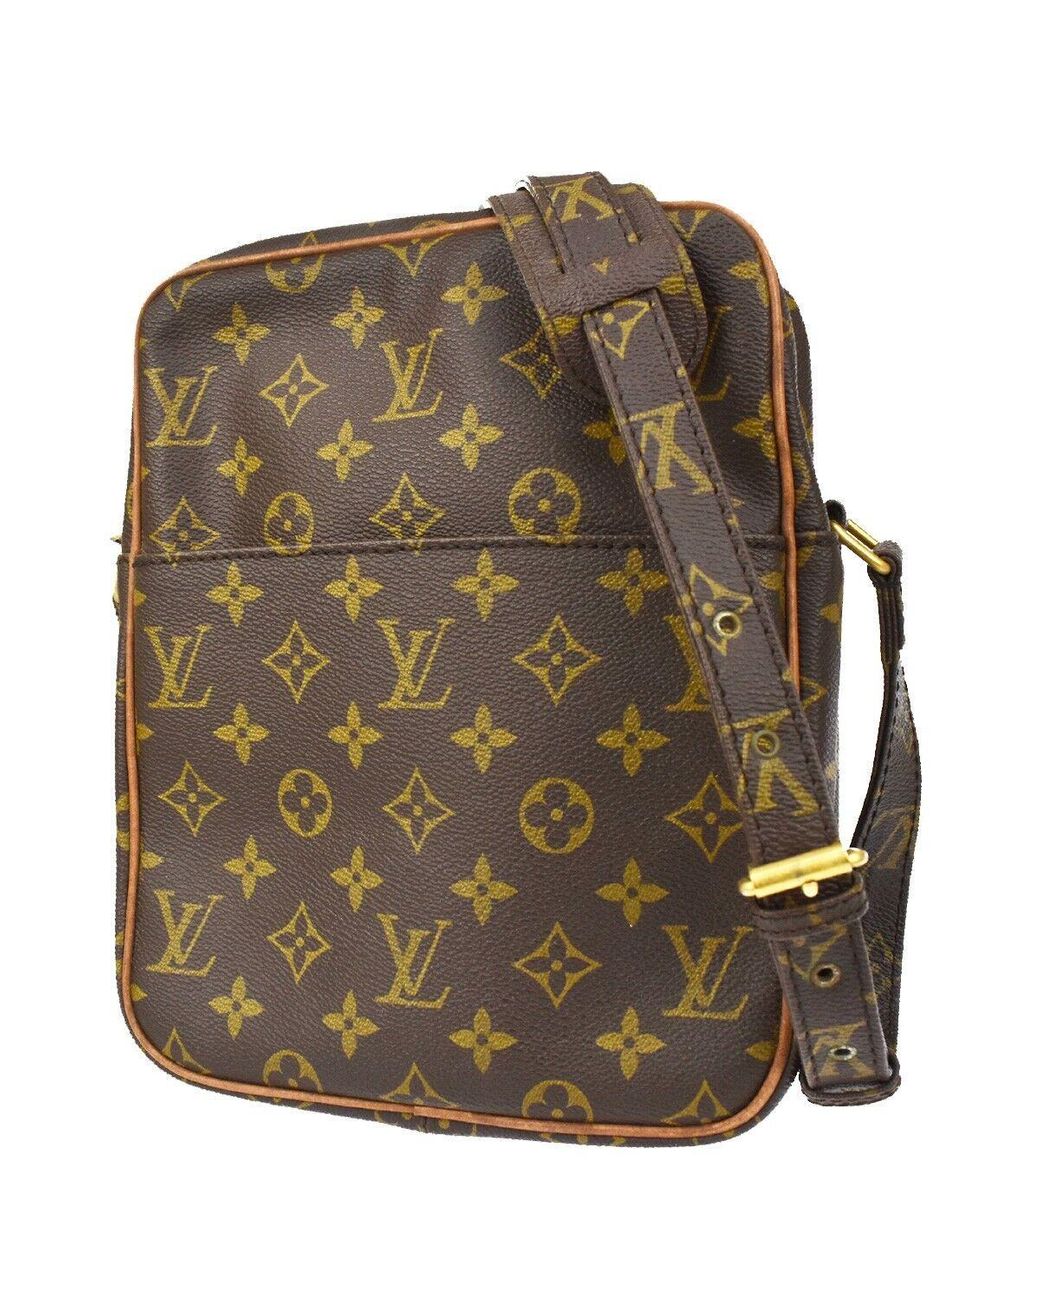 Louis Vuitton Pochette Marly Brown Canvas Shoulder Bag (Pre-Owned)